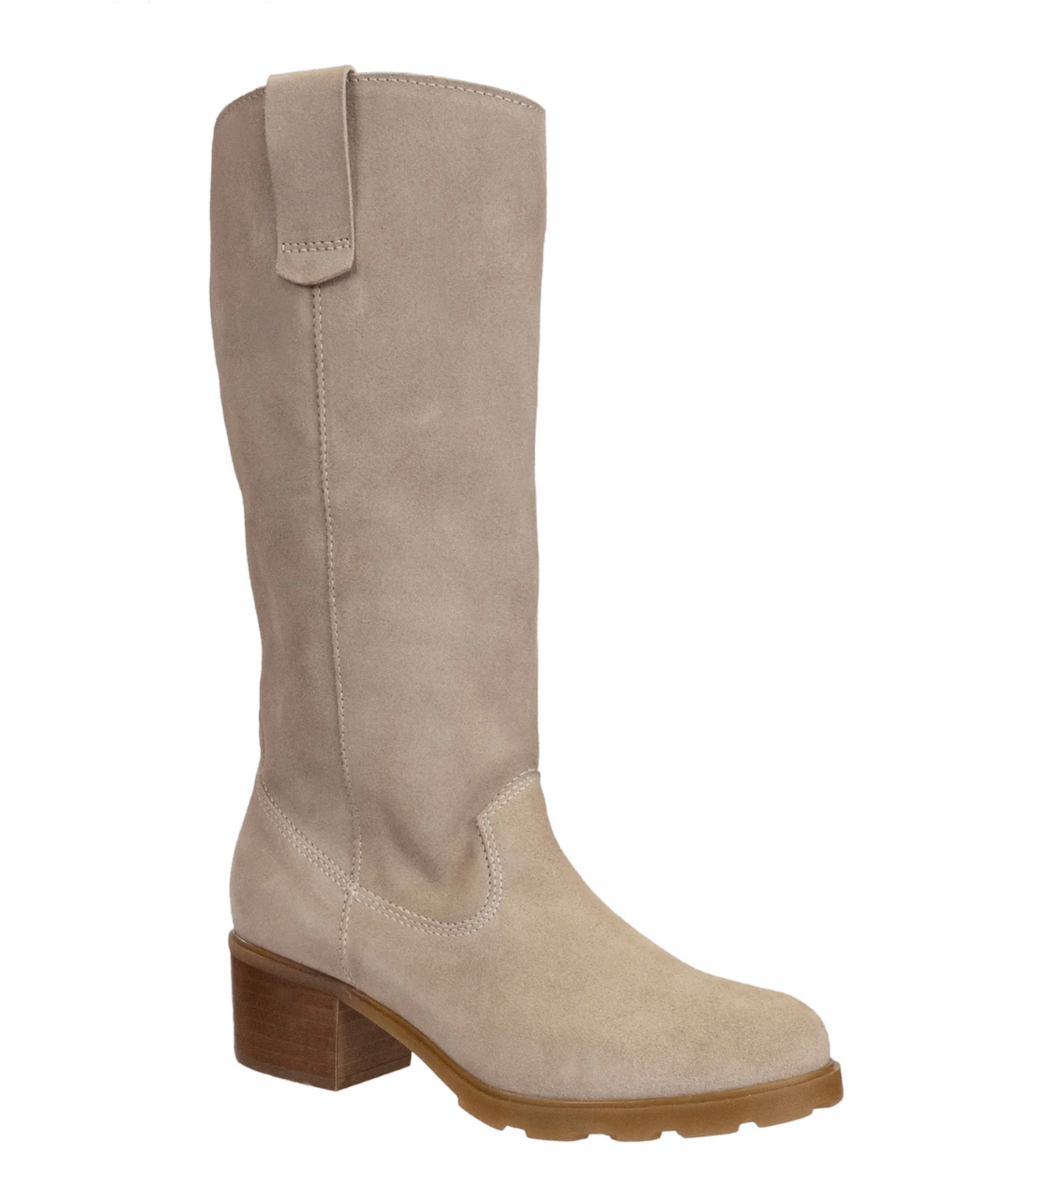 Tallow Boots in Camel